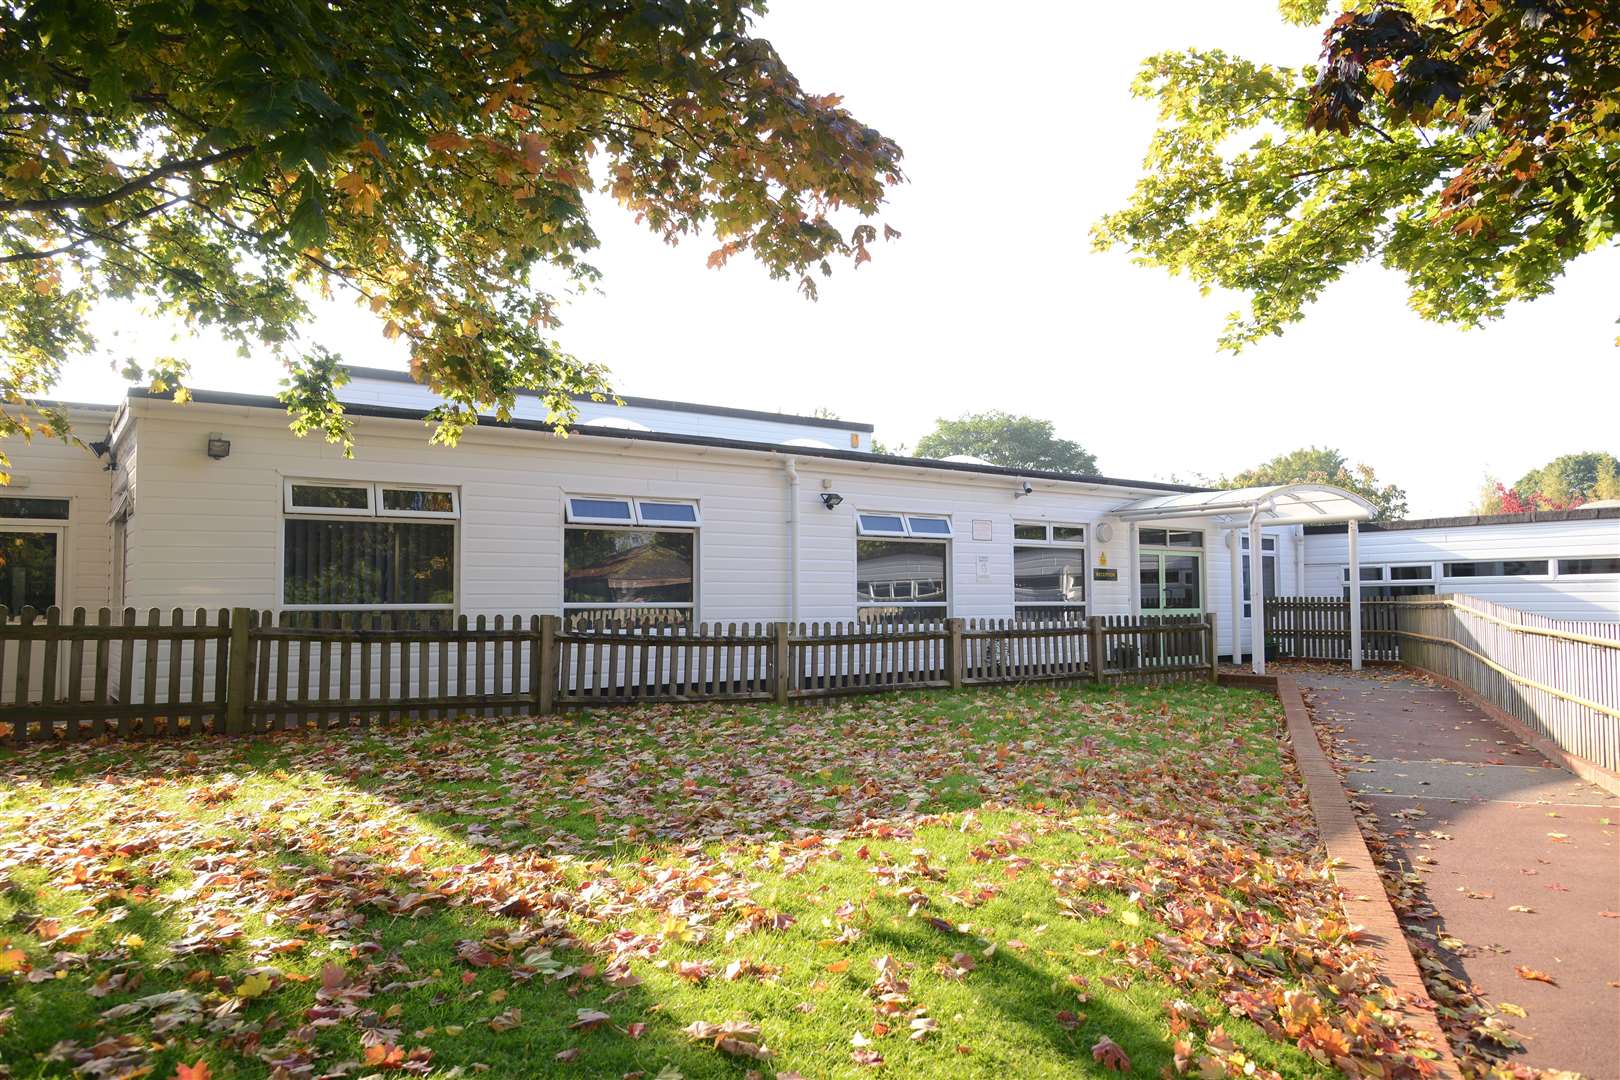 Allington Primary School is one of the few to keep its outstanding rating